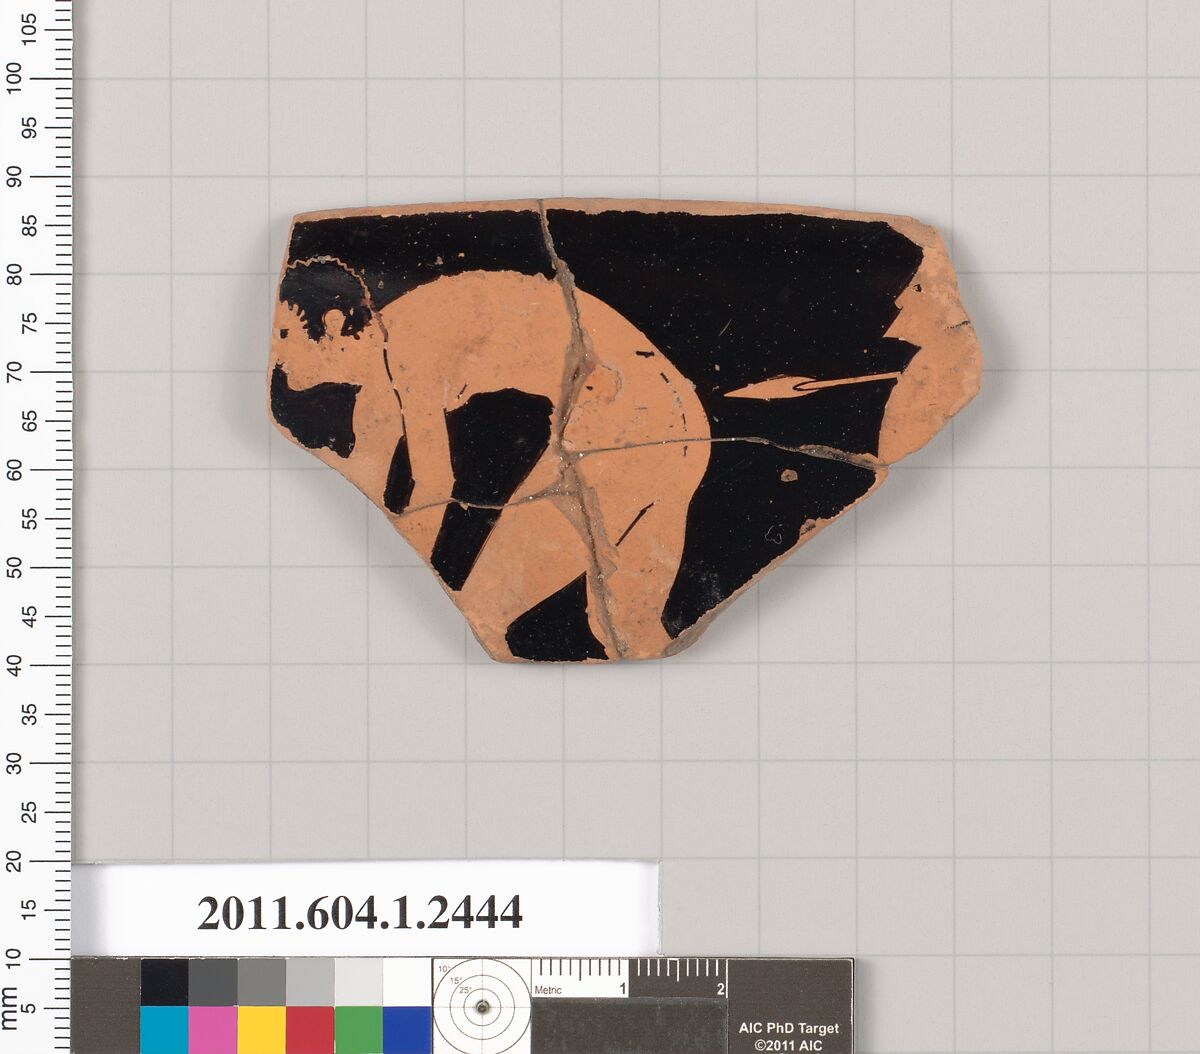 Terracotta rim fragment of a kylix (drinking cup), Attributed to the Ambrosios Painter [DvB], Terracotta, Greek, Attic 